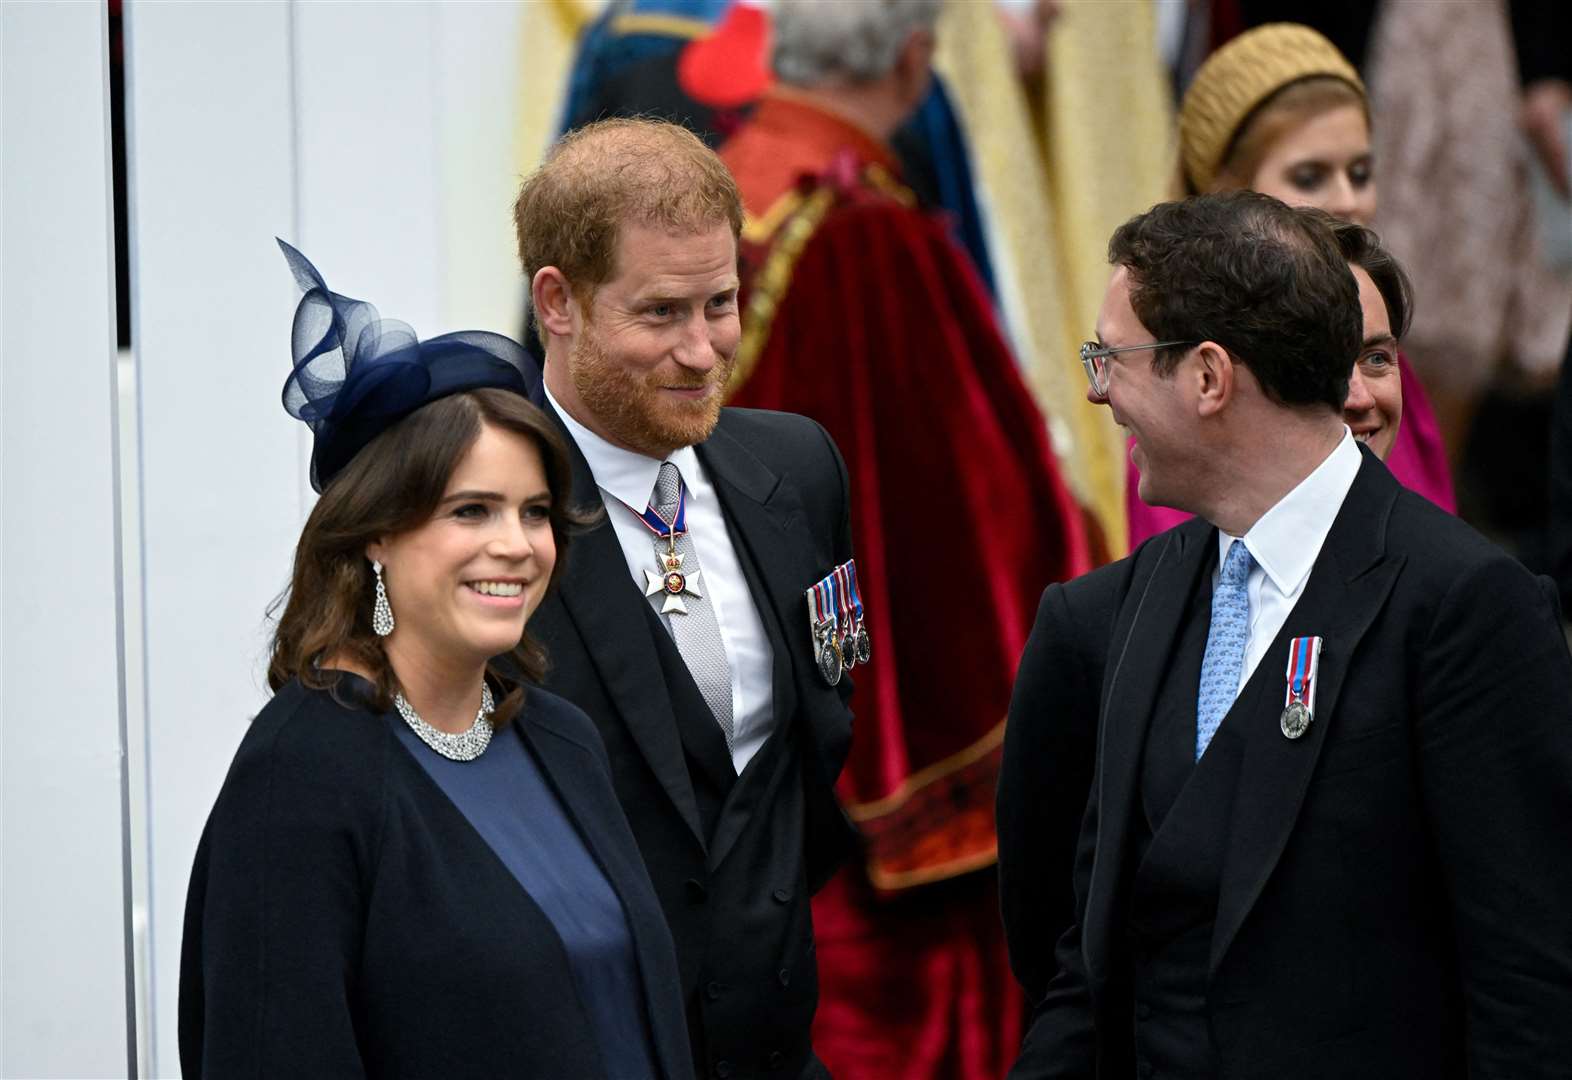 Princess Eugenie and Jack Brooksbank with the Duke of Sussex at Westminster Abbey after the coronation (Toby Melville/PA)